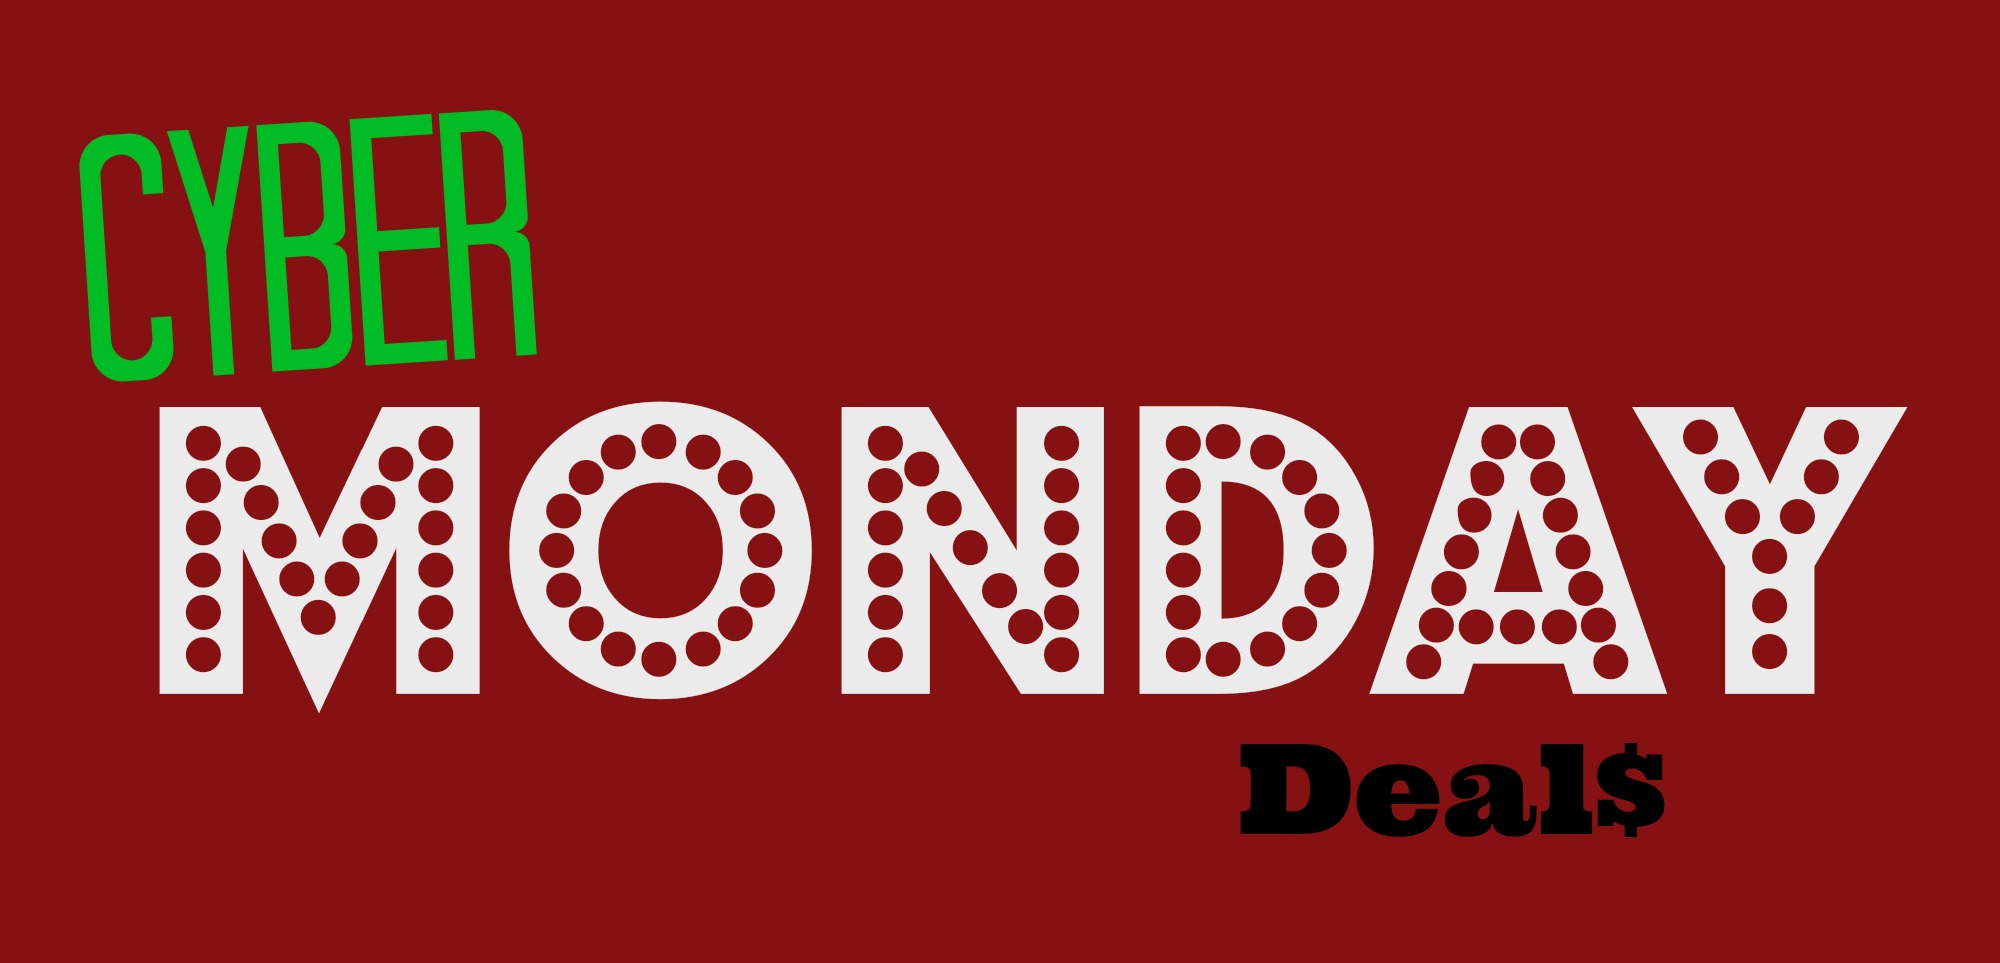 2015 Cyber Monday Deals and Coupon Codes! - My Crazy Savings